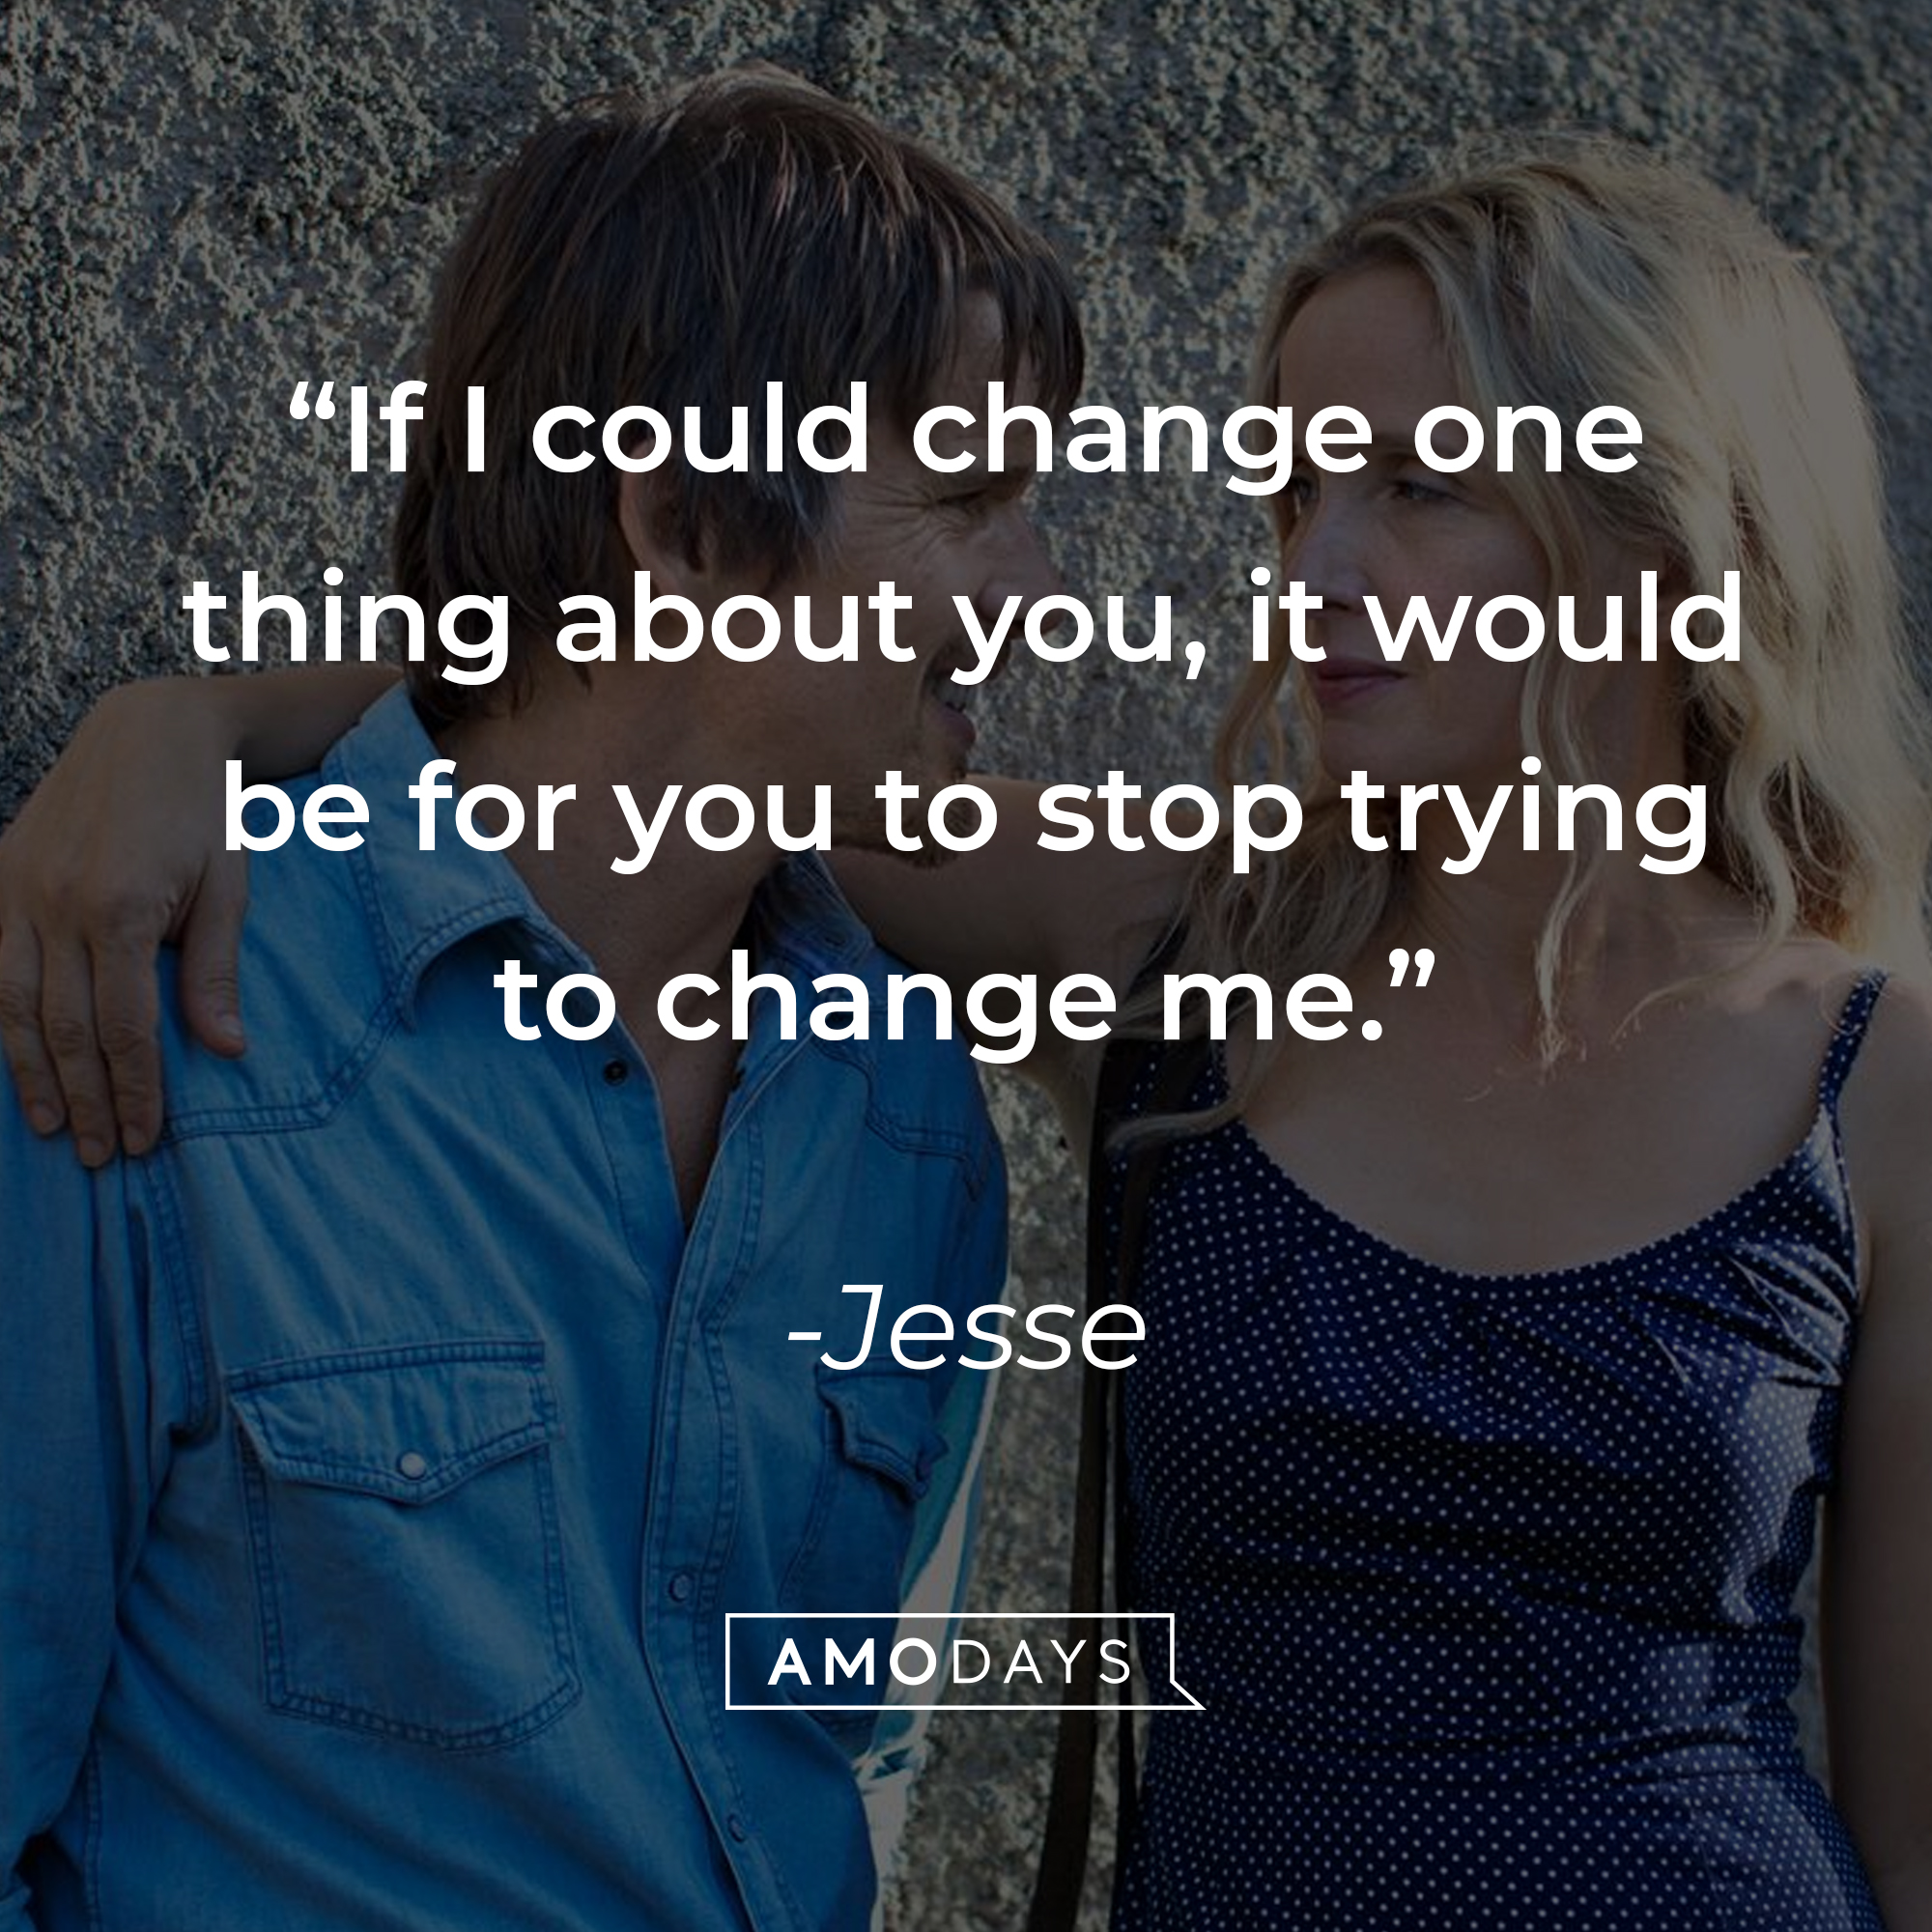 Jesse, with his quote:“If I could change one thing about you, it would be for you to stop trying to change me.” │Source: facebook.com/BeforeMidnightFilm